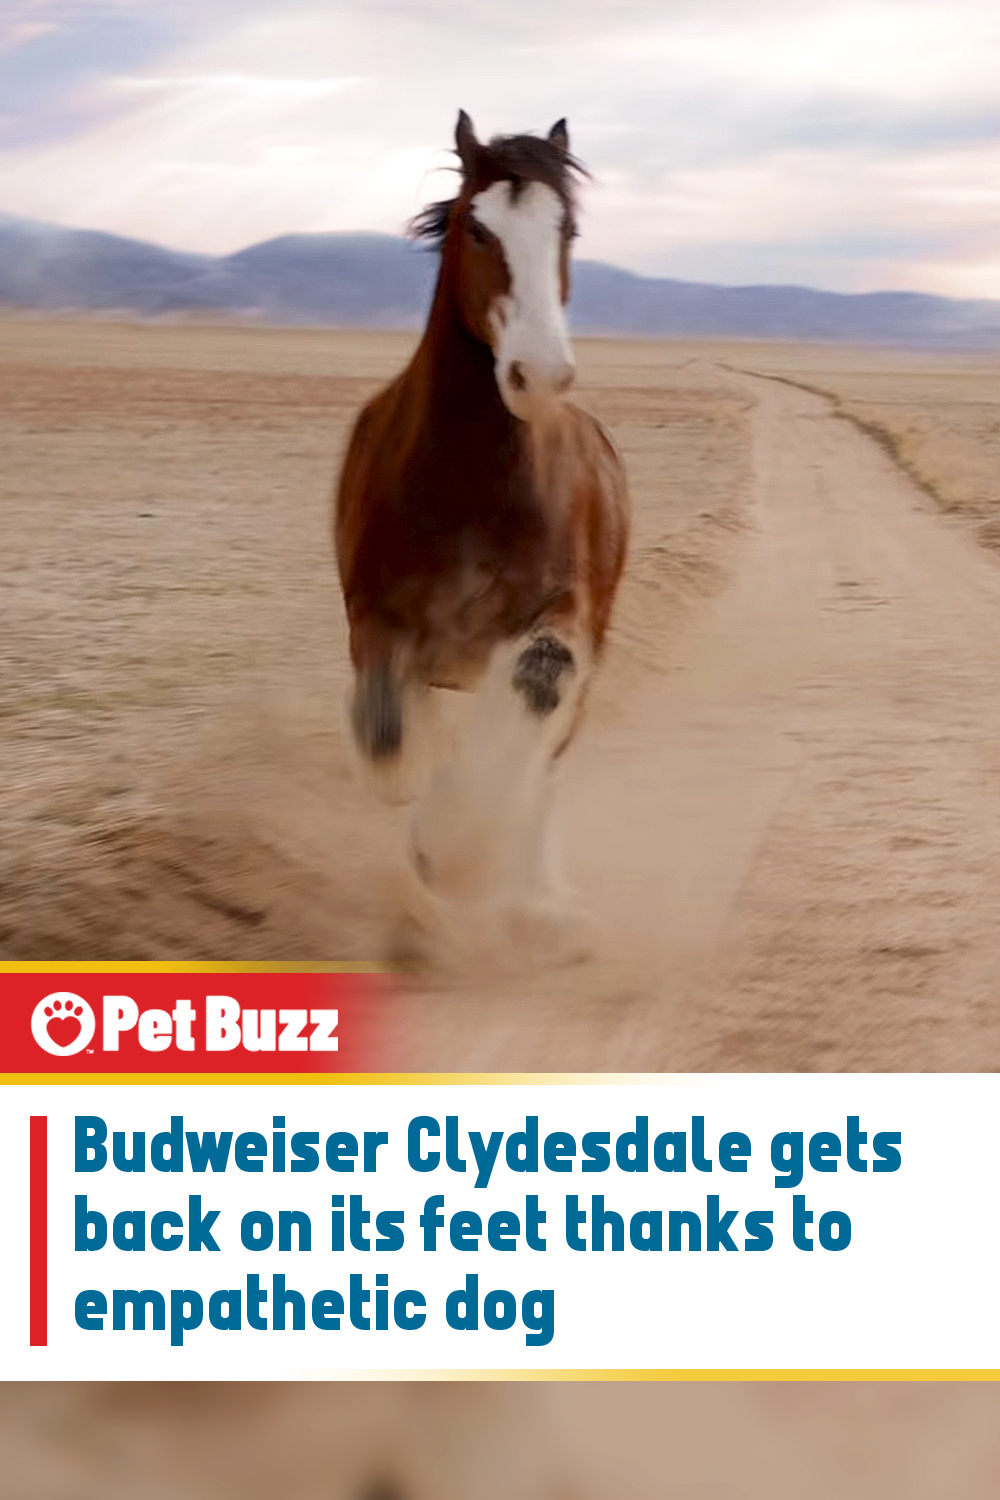 Budweiser Clydesdale gets back on its feet thanks to empathetic dog